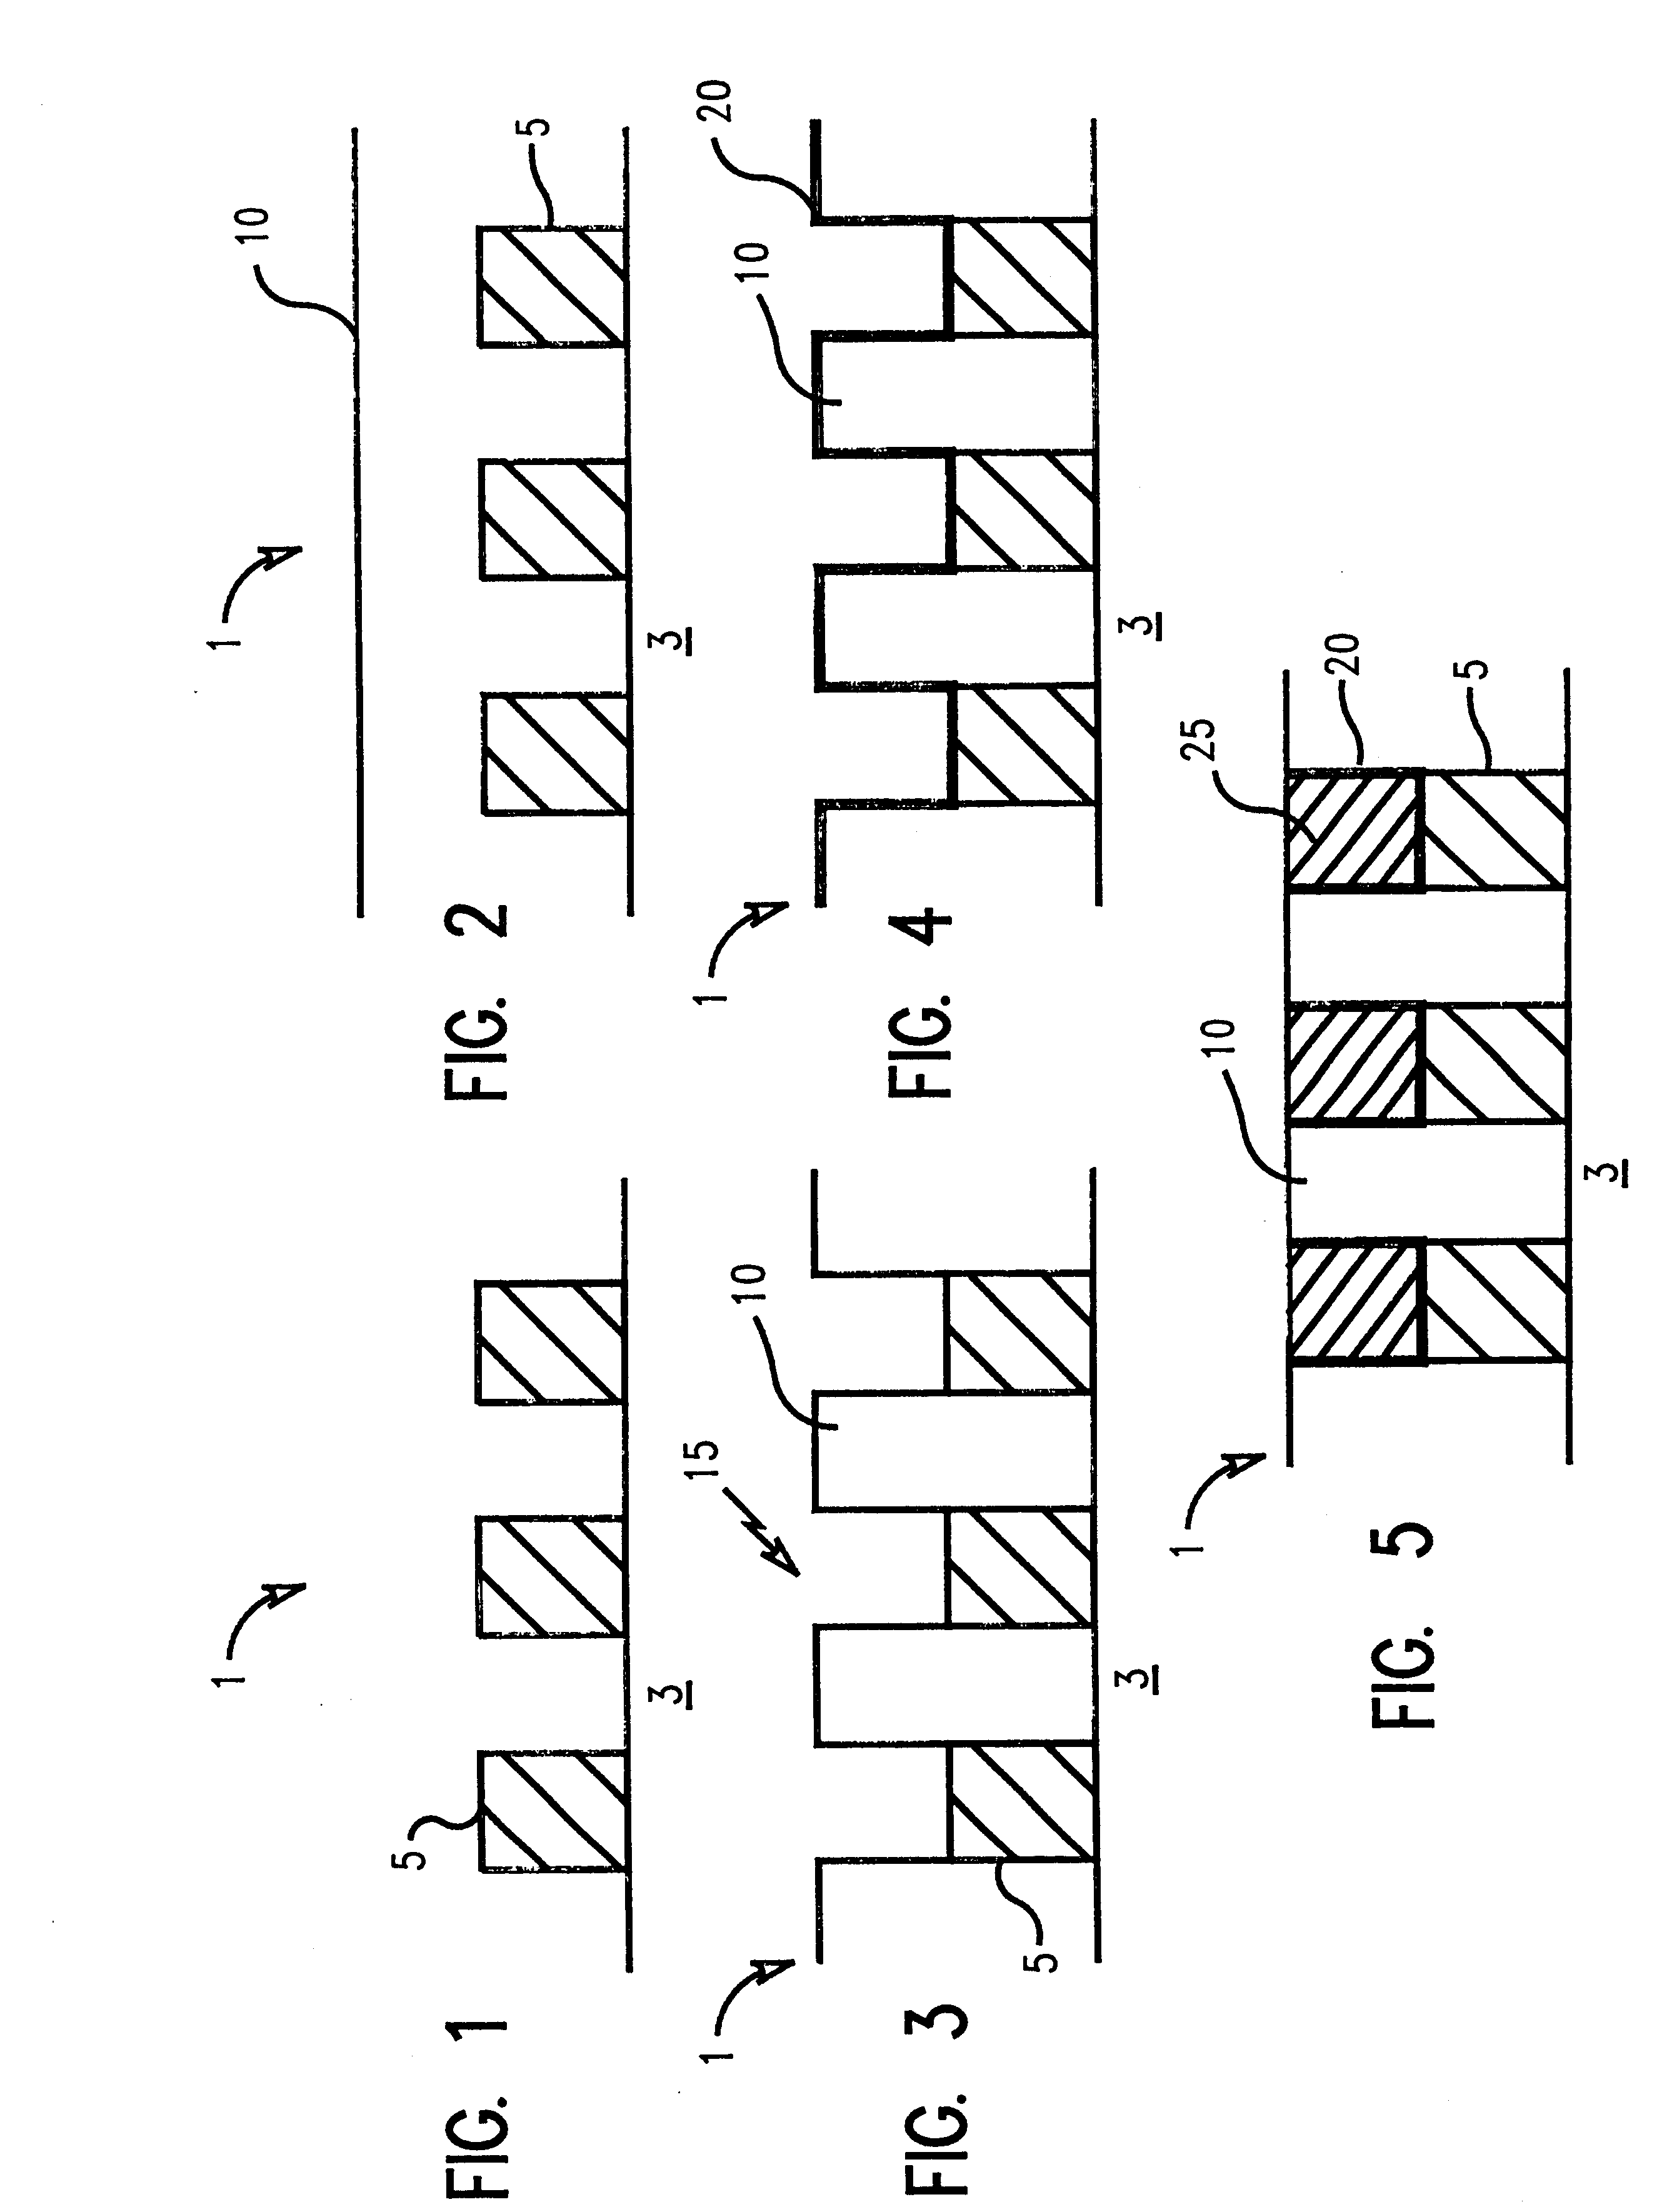 Sputtered tungsten diffusion barrier for improved interconnect robustness